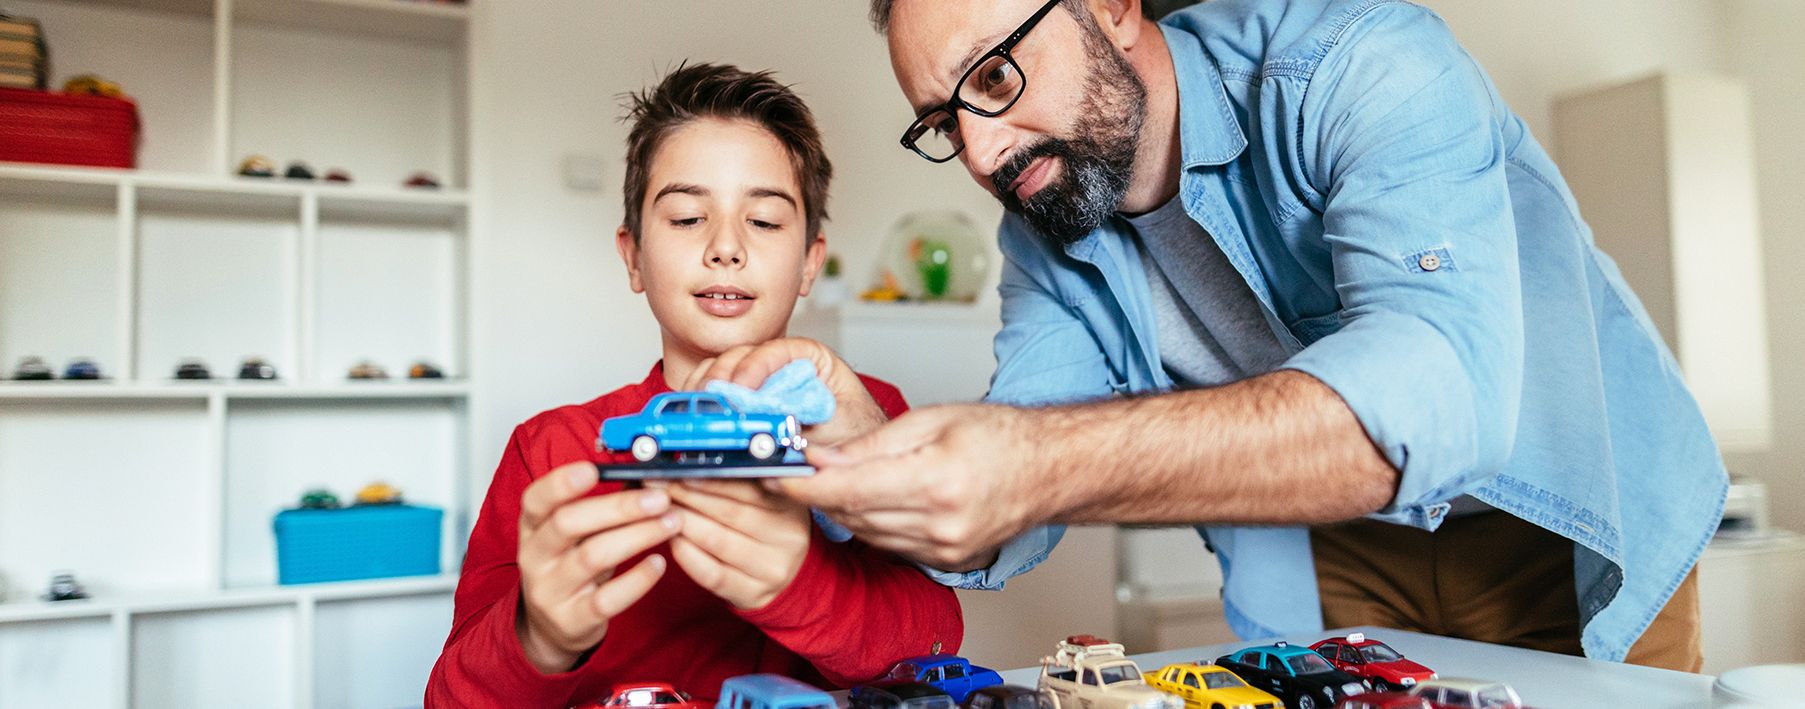 A father and son playing with a toy car in a kids room